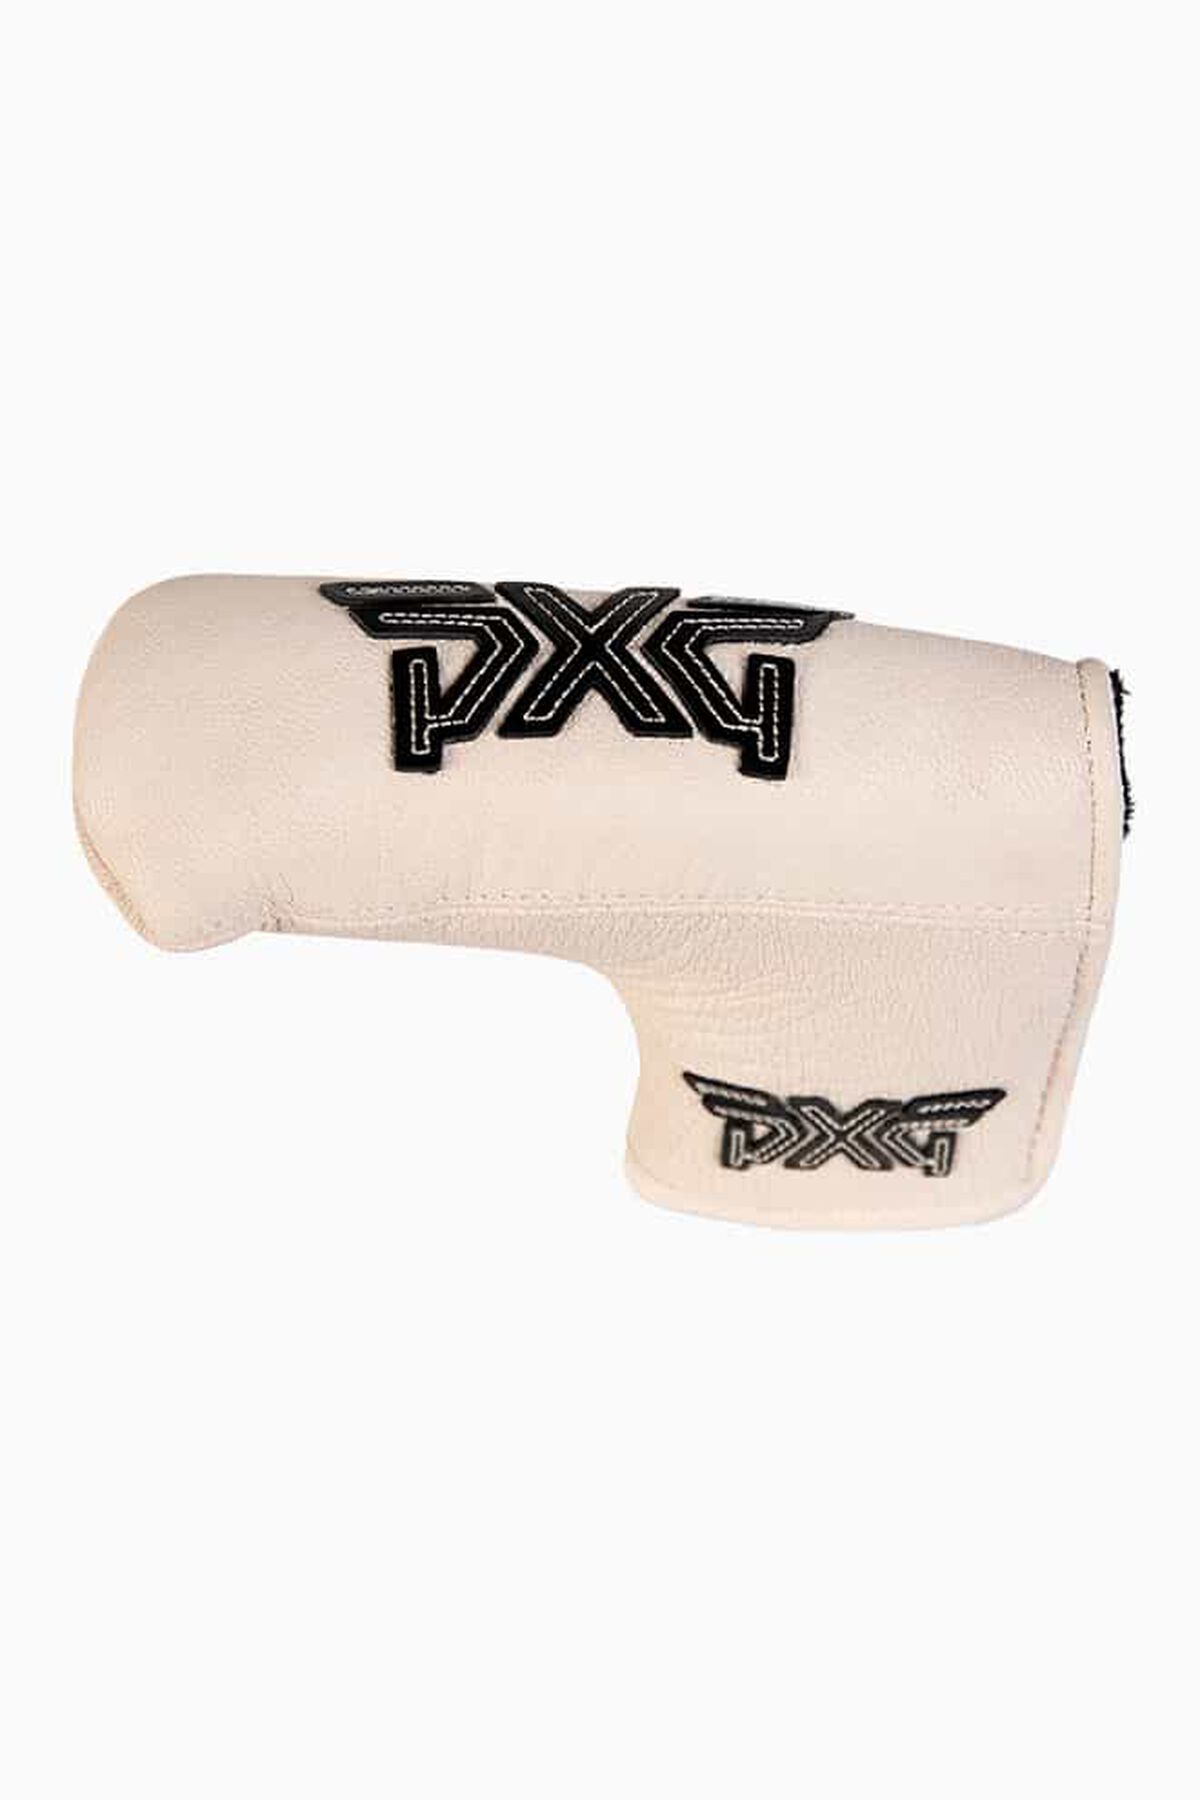 Lifted Leather Cream Blade Headcover 